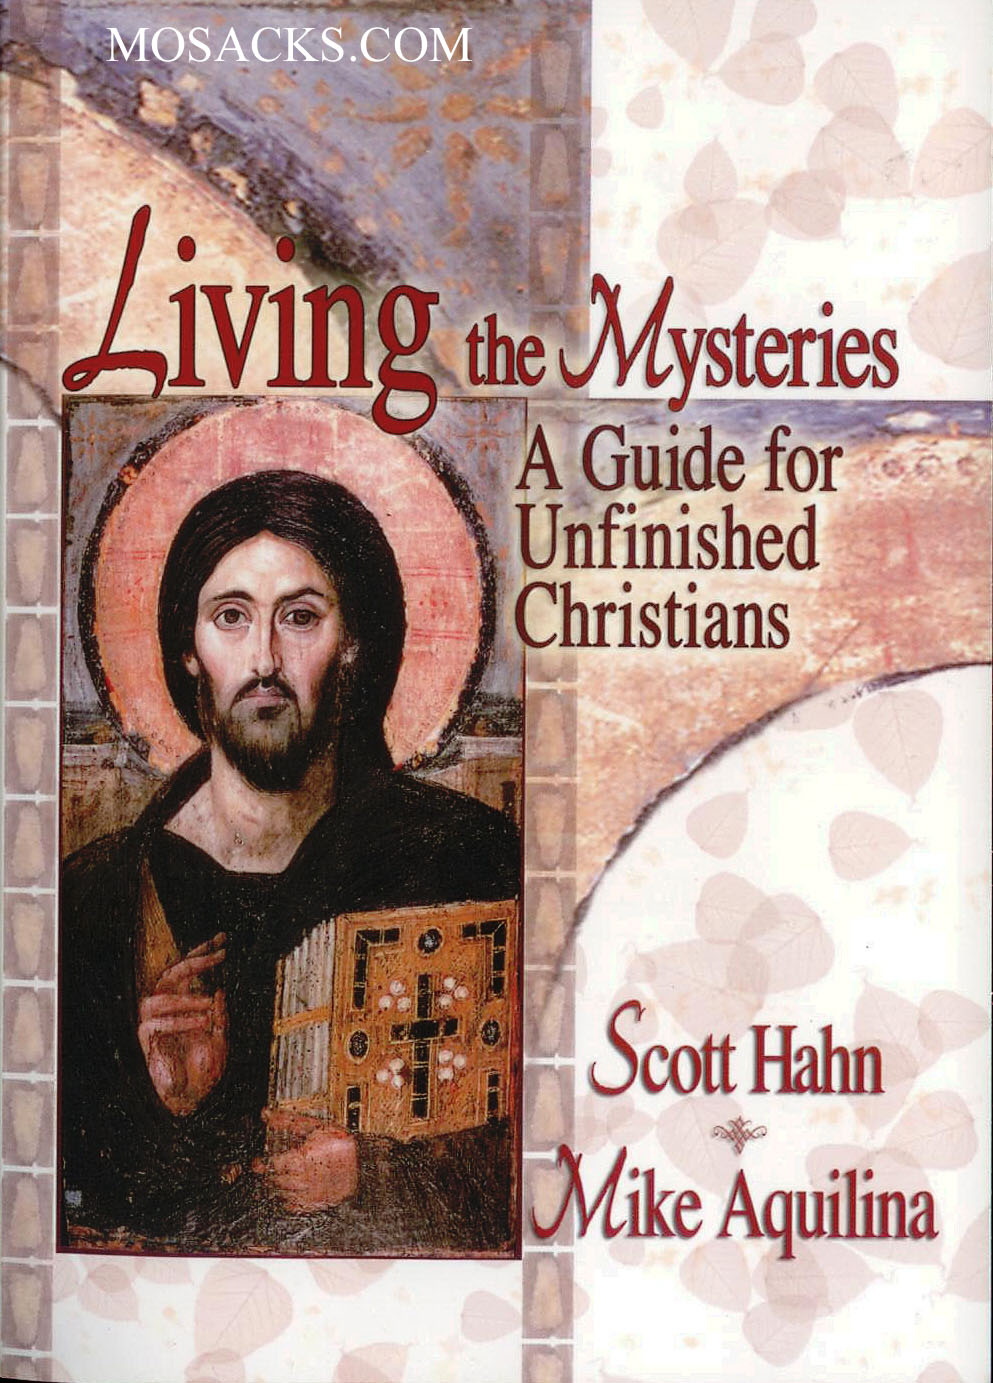 Living the Mysteries: A Guide for Unfinished Christians, Hahn, Aquilina